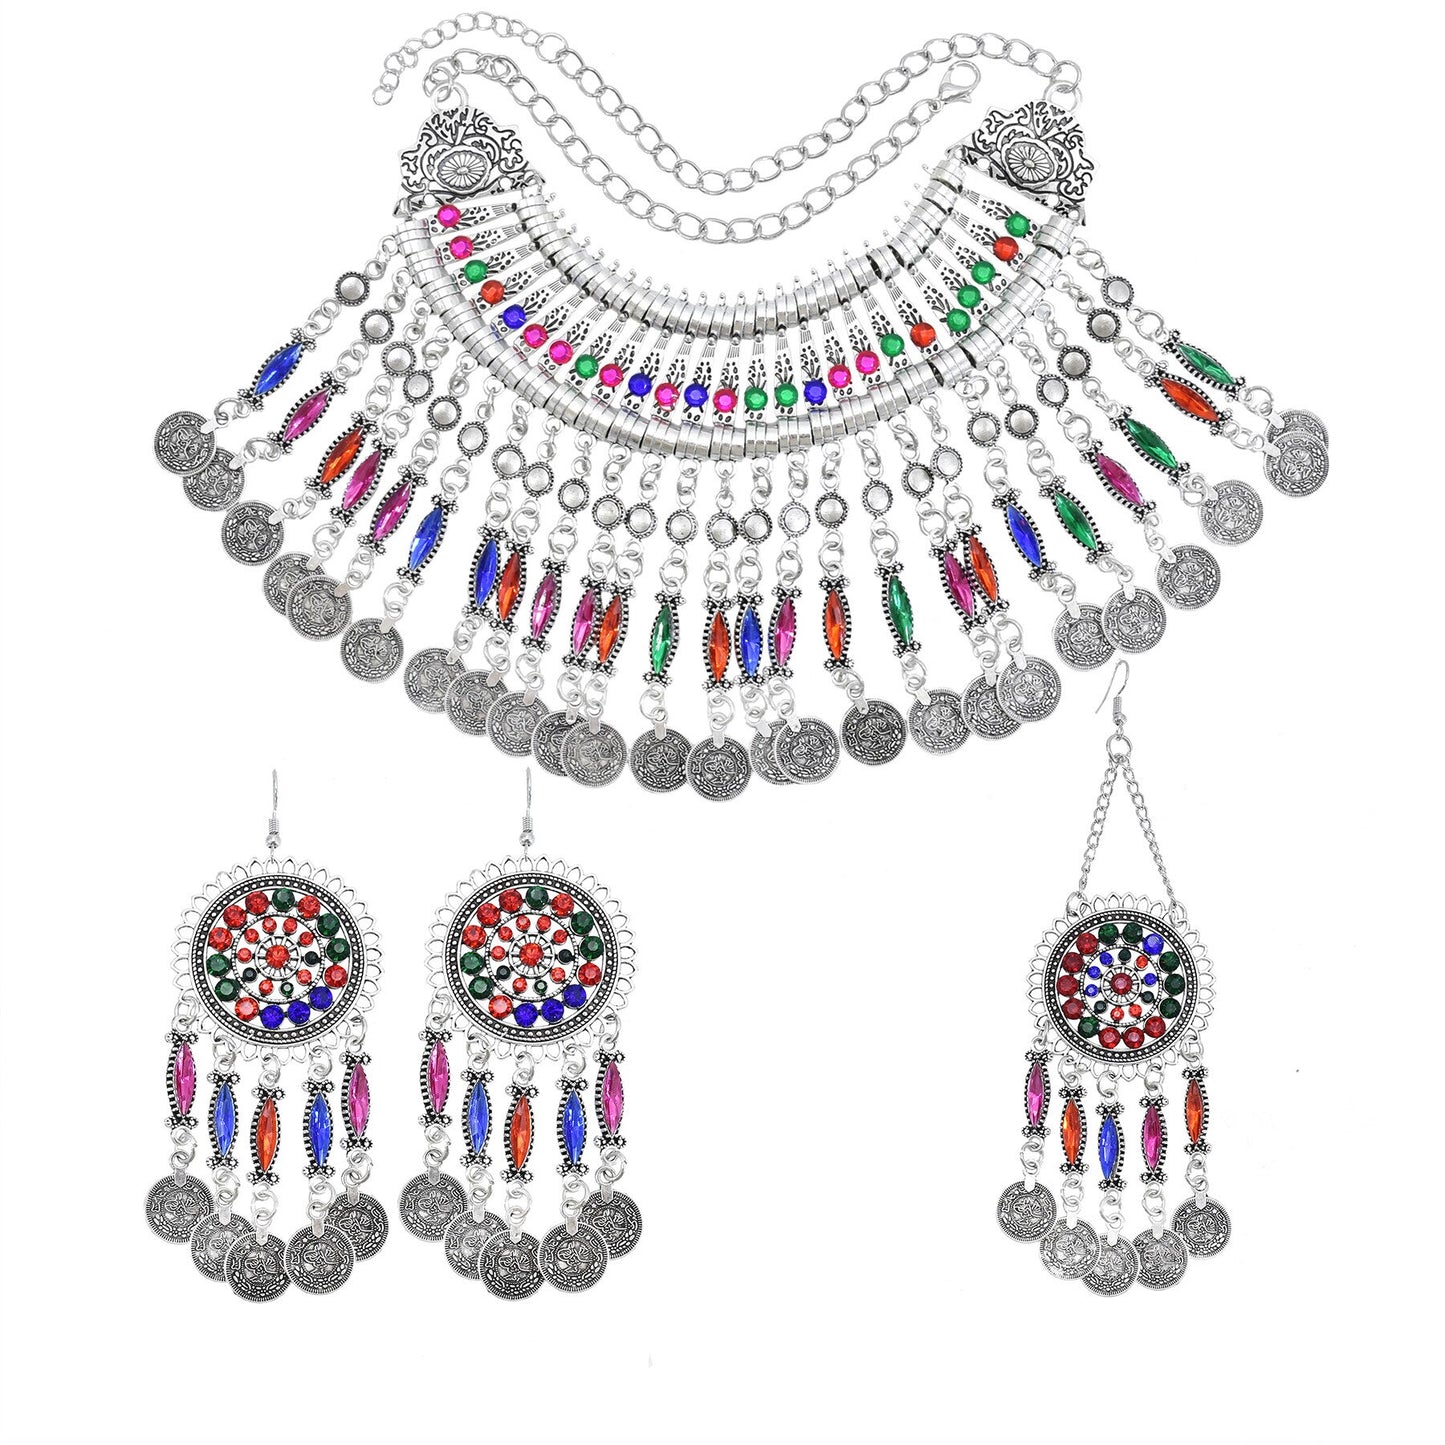 Colorful Crystal Bead Coin Ethnic Choker Necklace Afghan Traditional Jewelry Sets